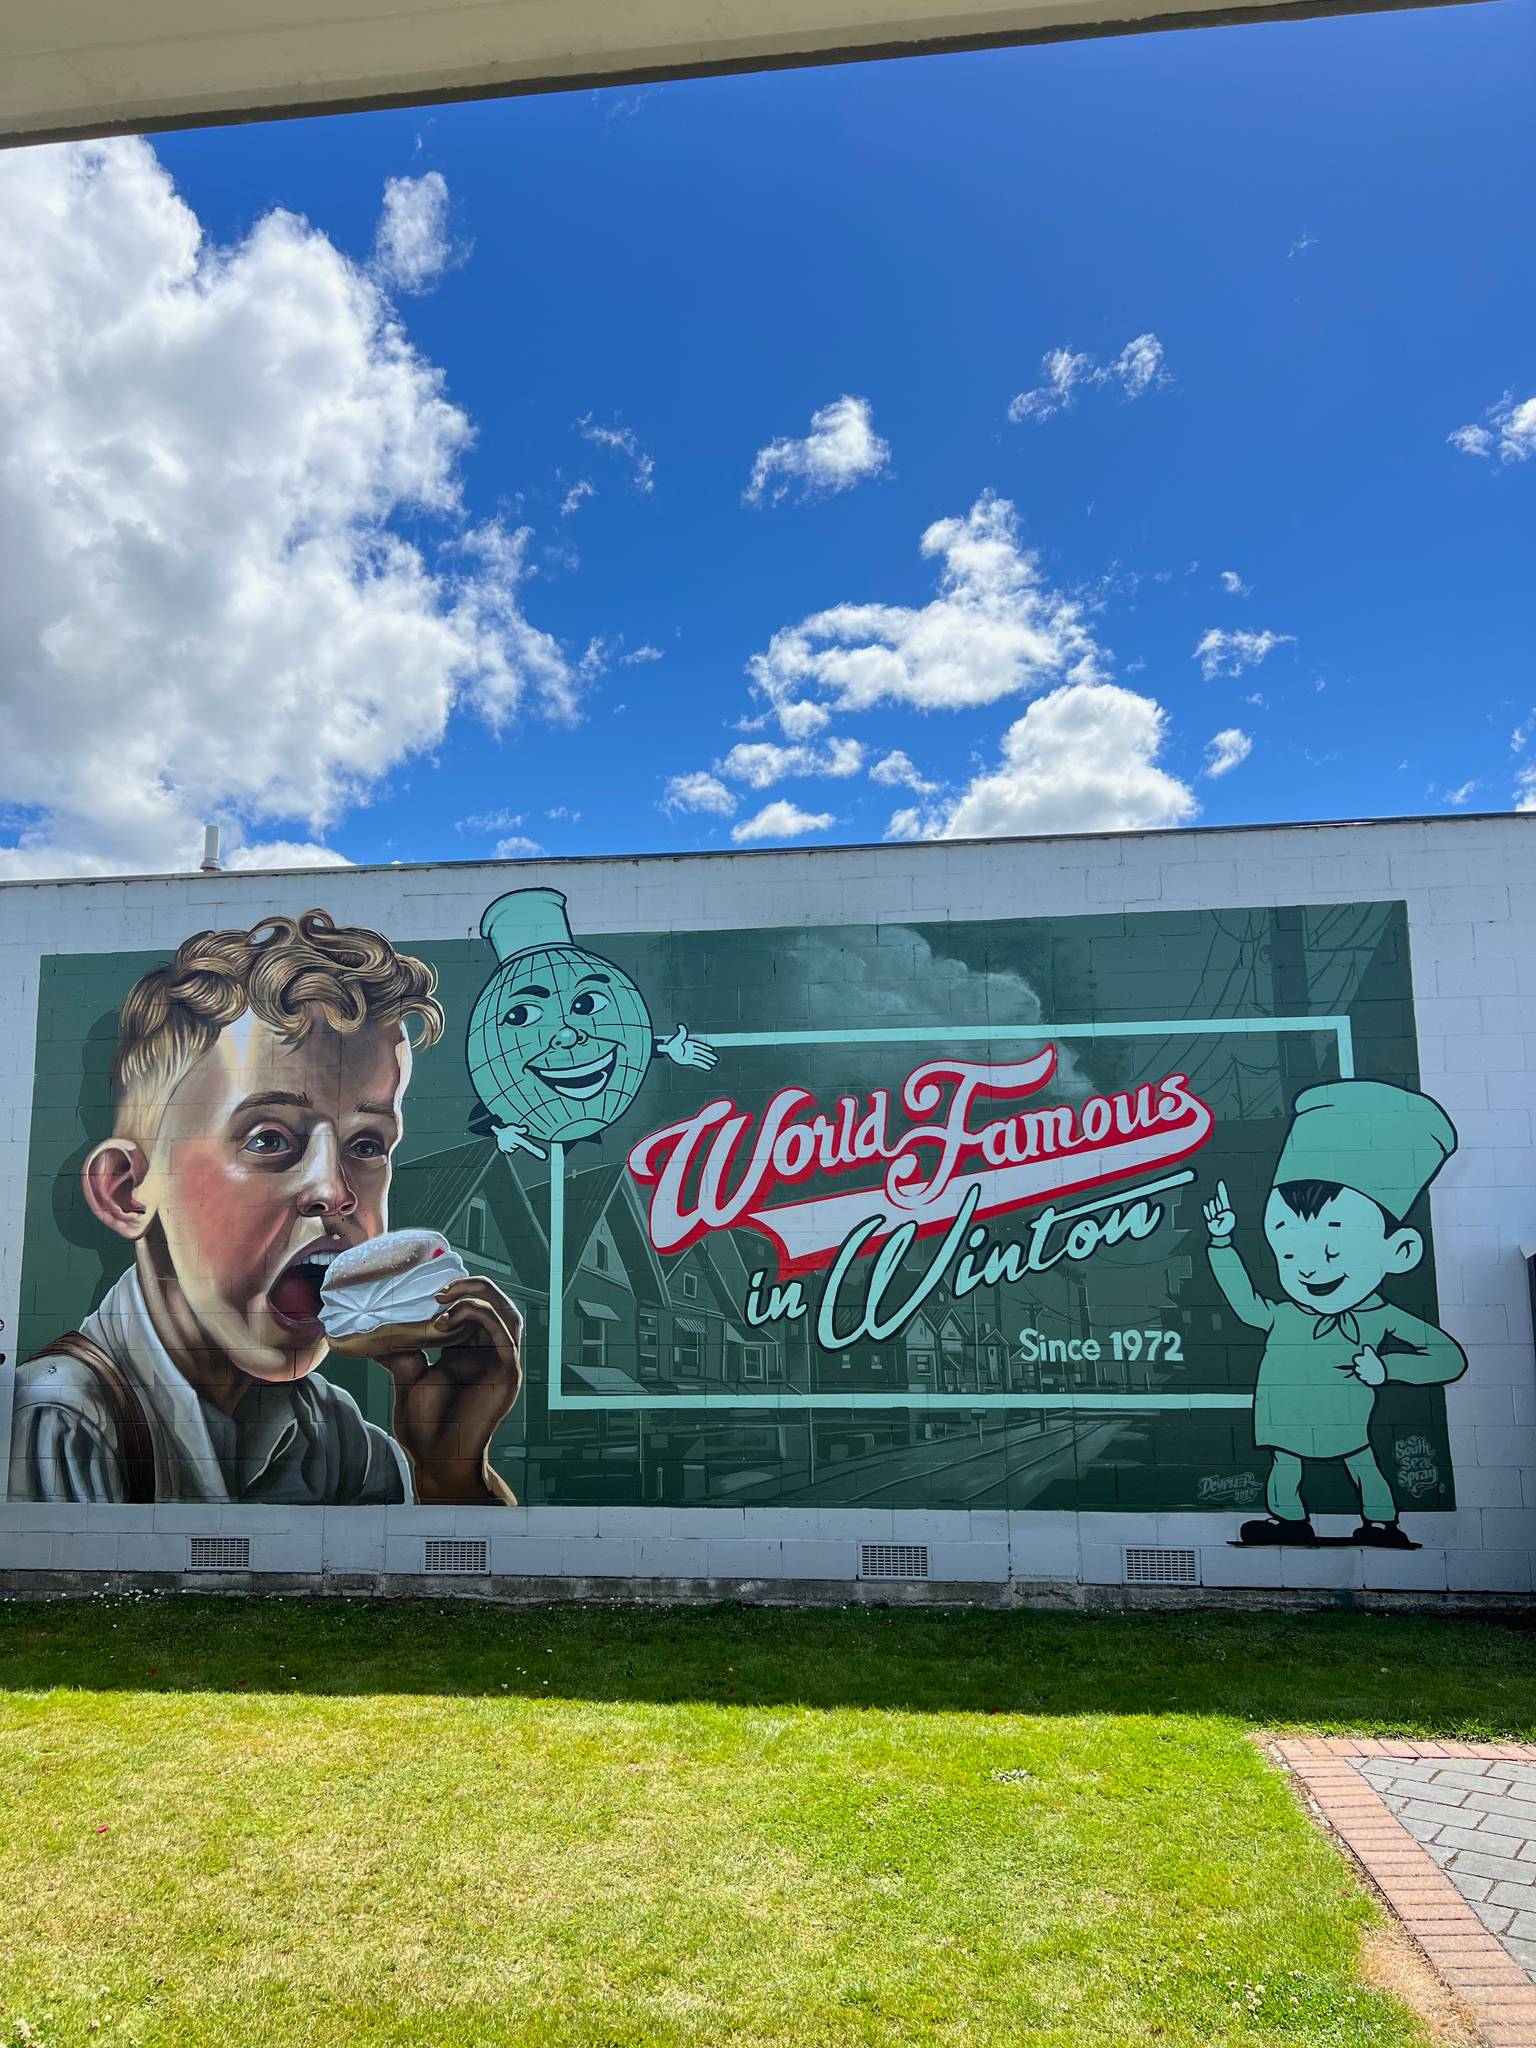 Dcypher&mdash;World Famous in Winton 